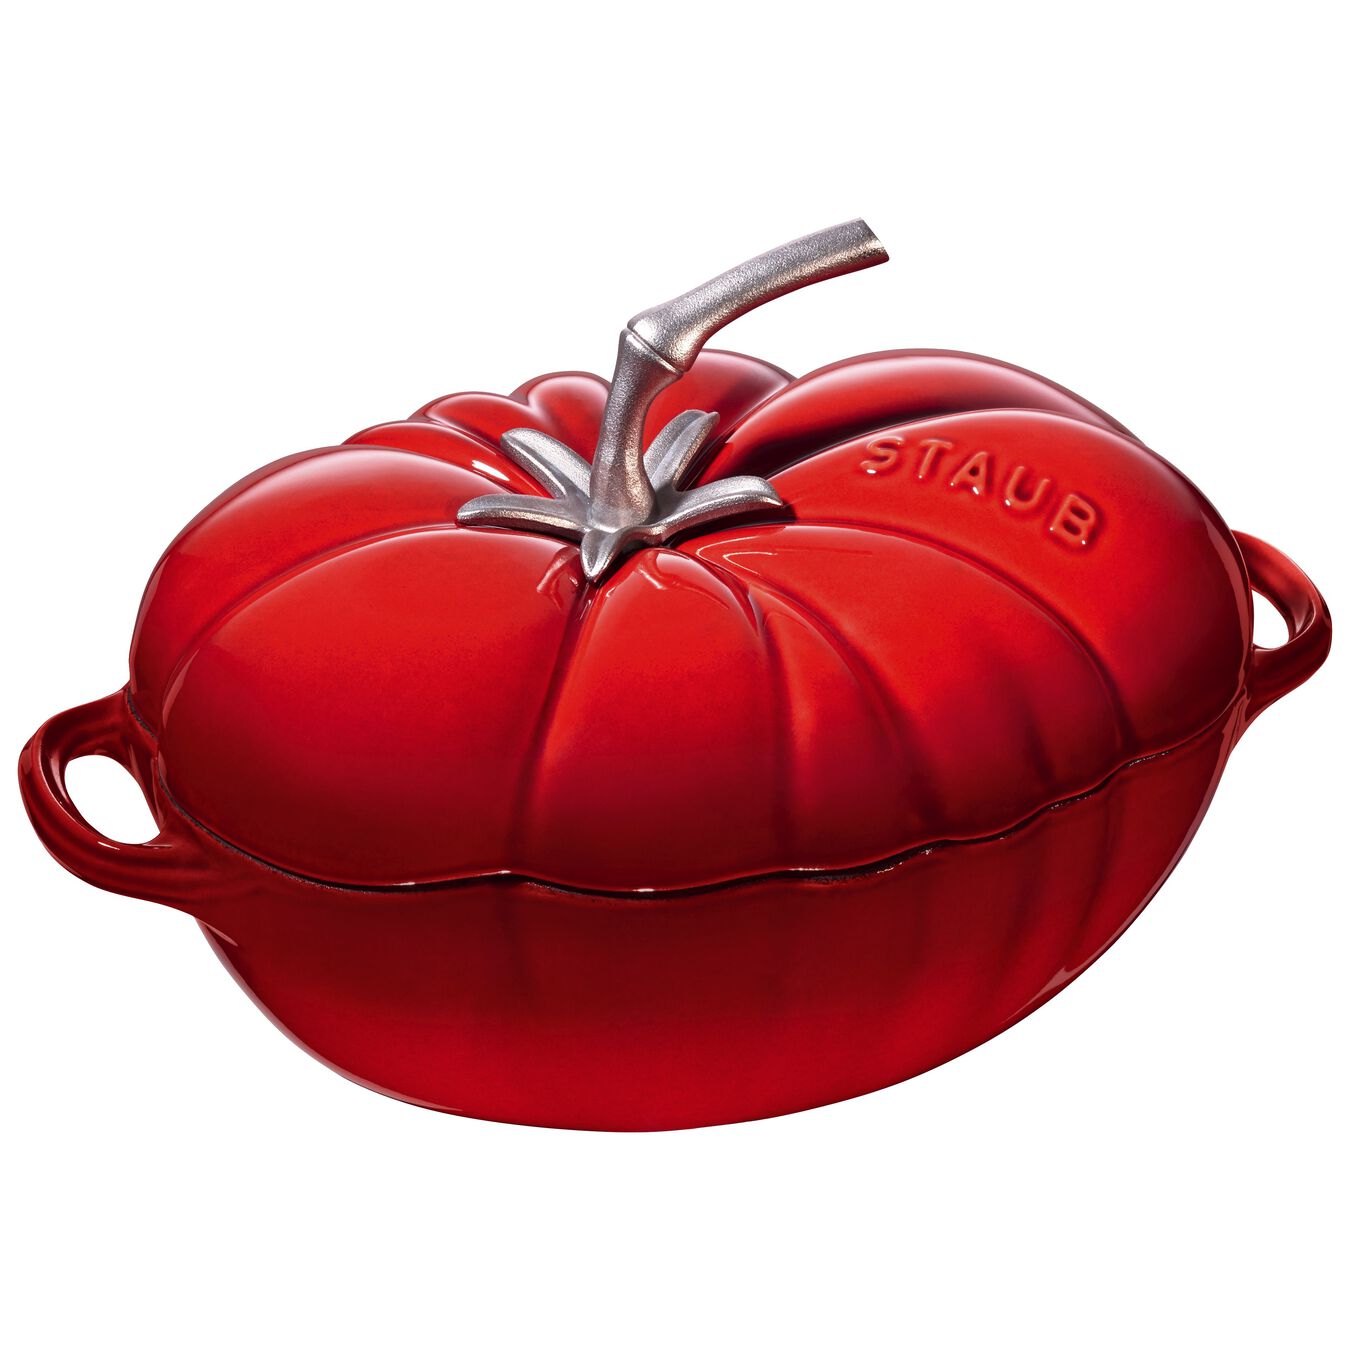 Cocotte 25 cm, Tomate, Kirsch-Rot, Gusseisen,,large 9